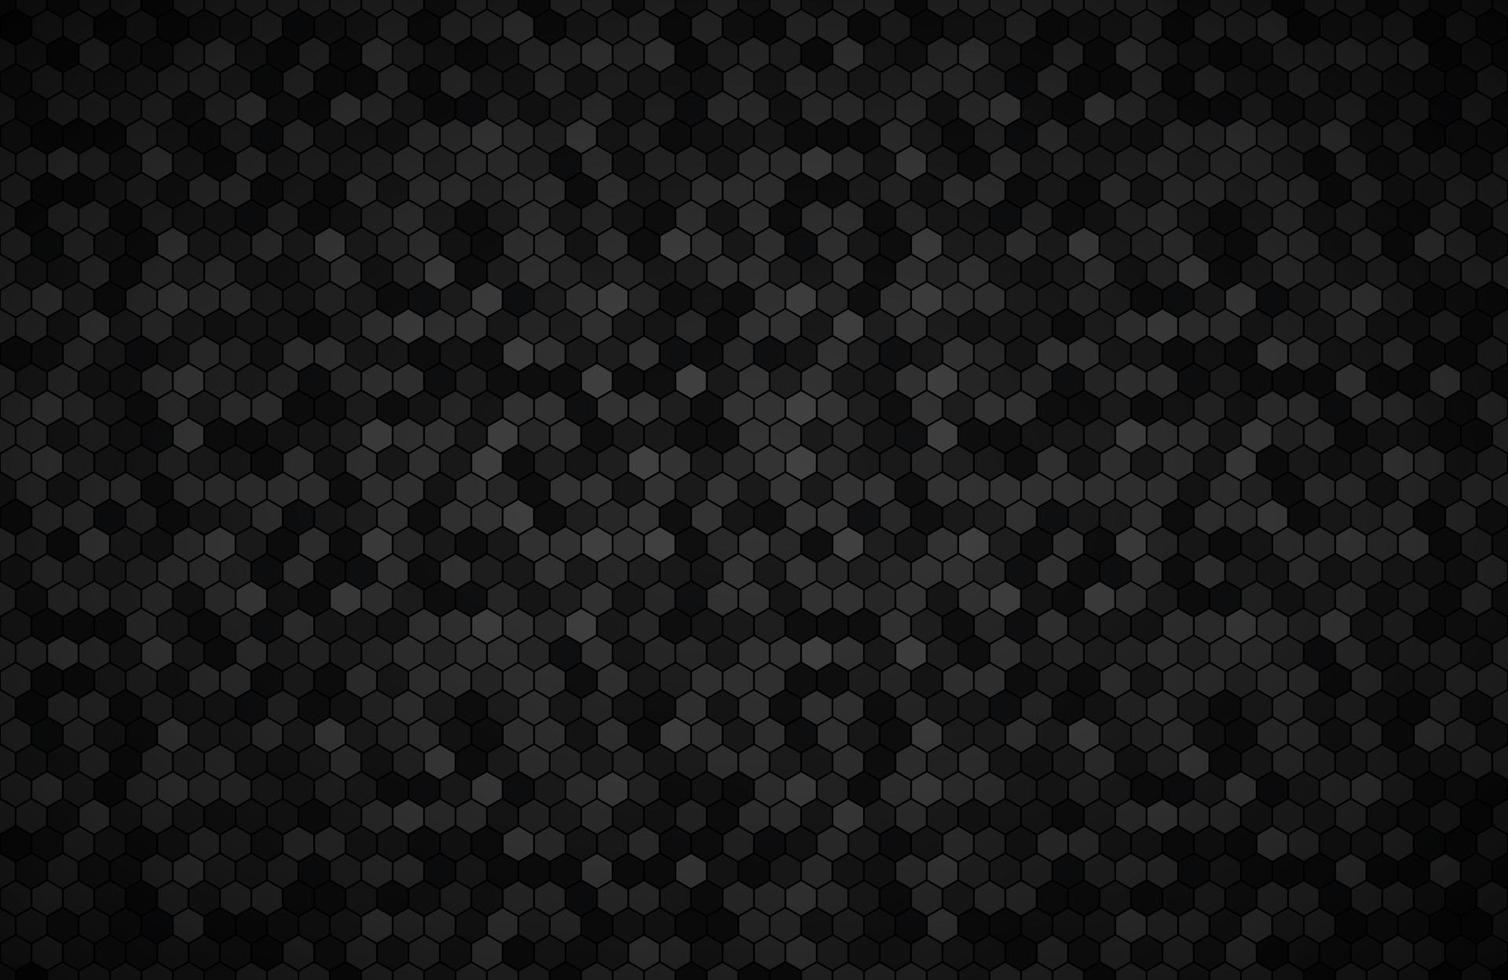 Dark widescreen background with hexagons with different transparencies Modern black geometric design Simple vector illustration